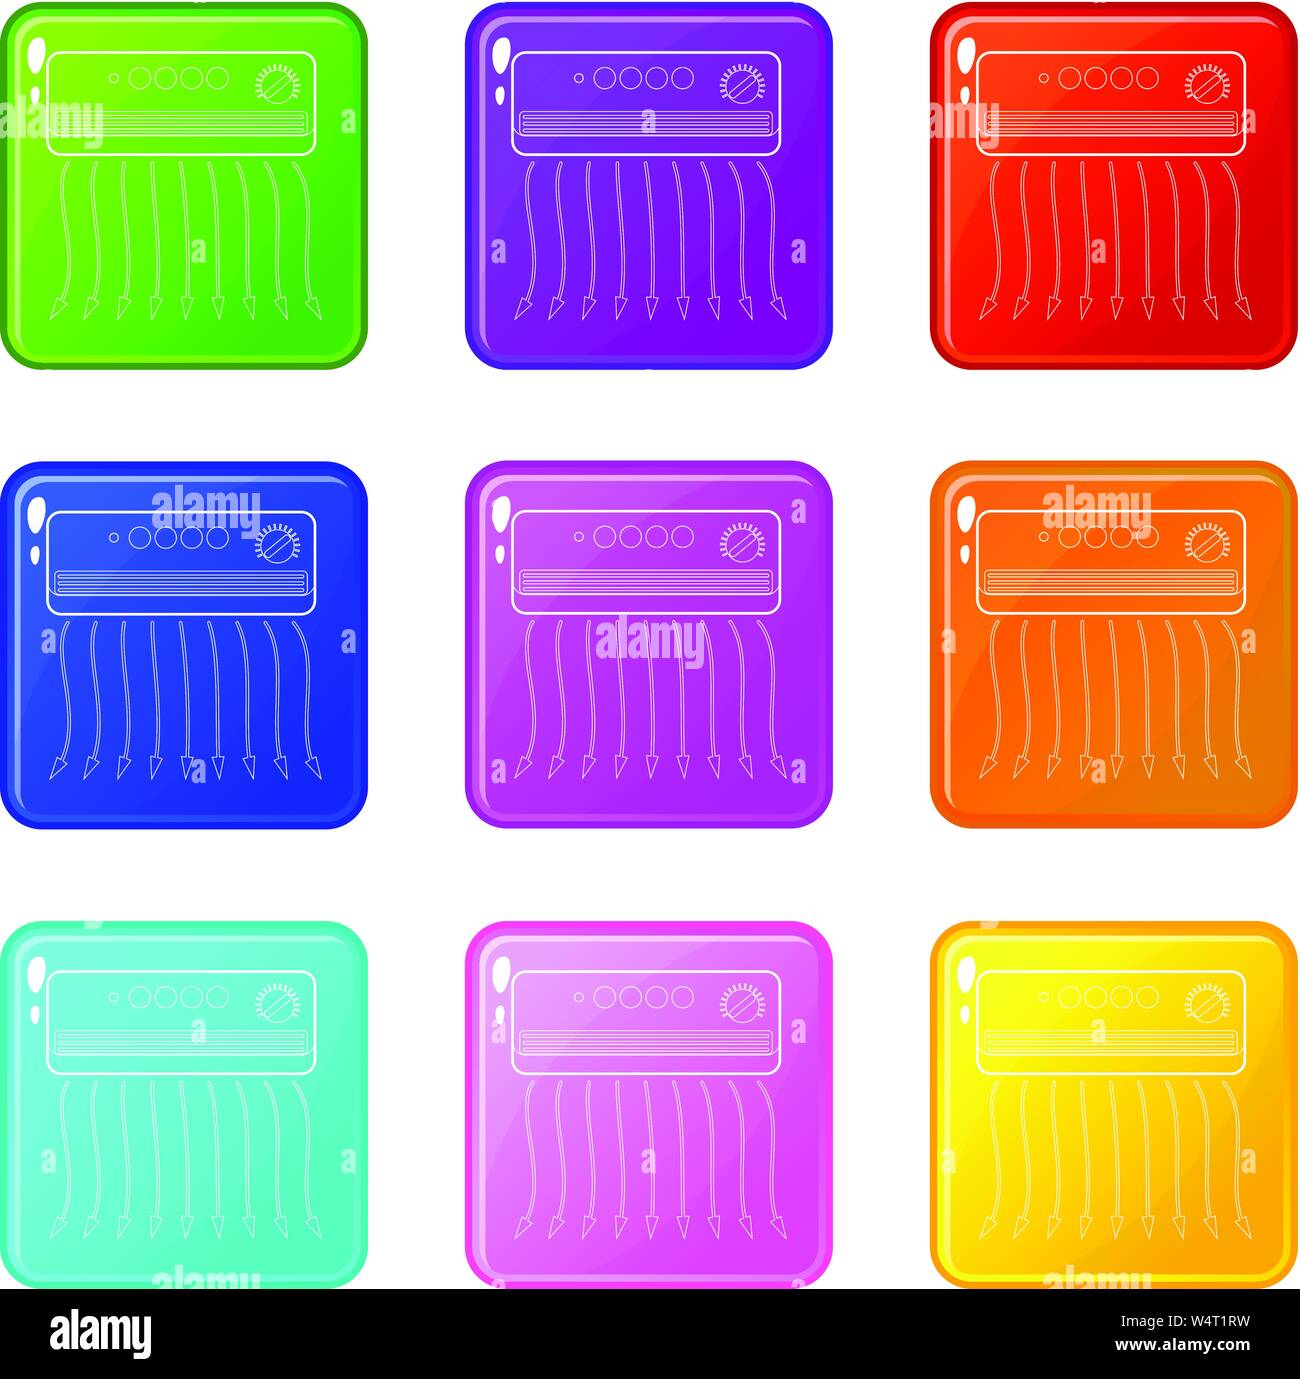 Wall heater icons set 9 color collection Stock Vector